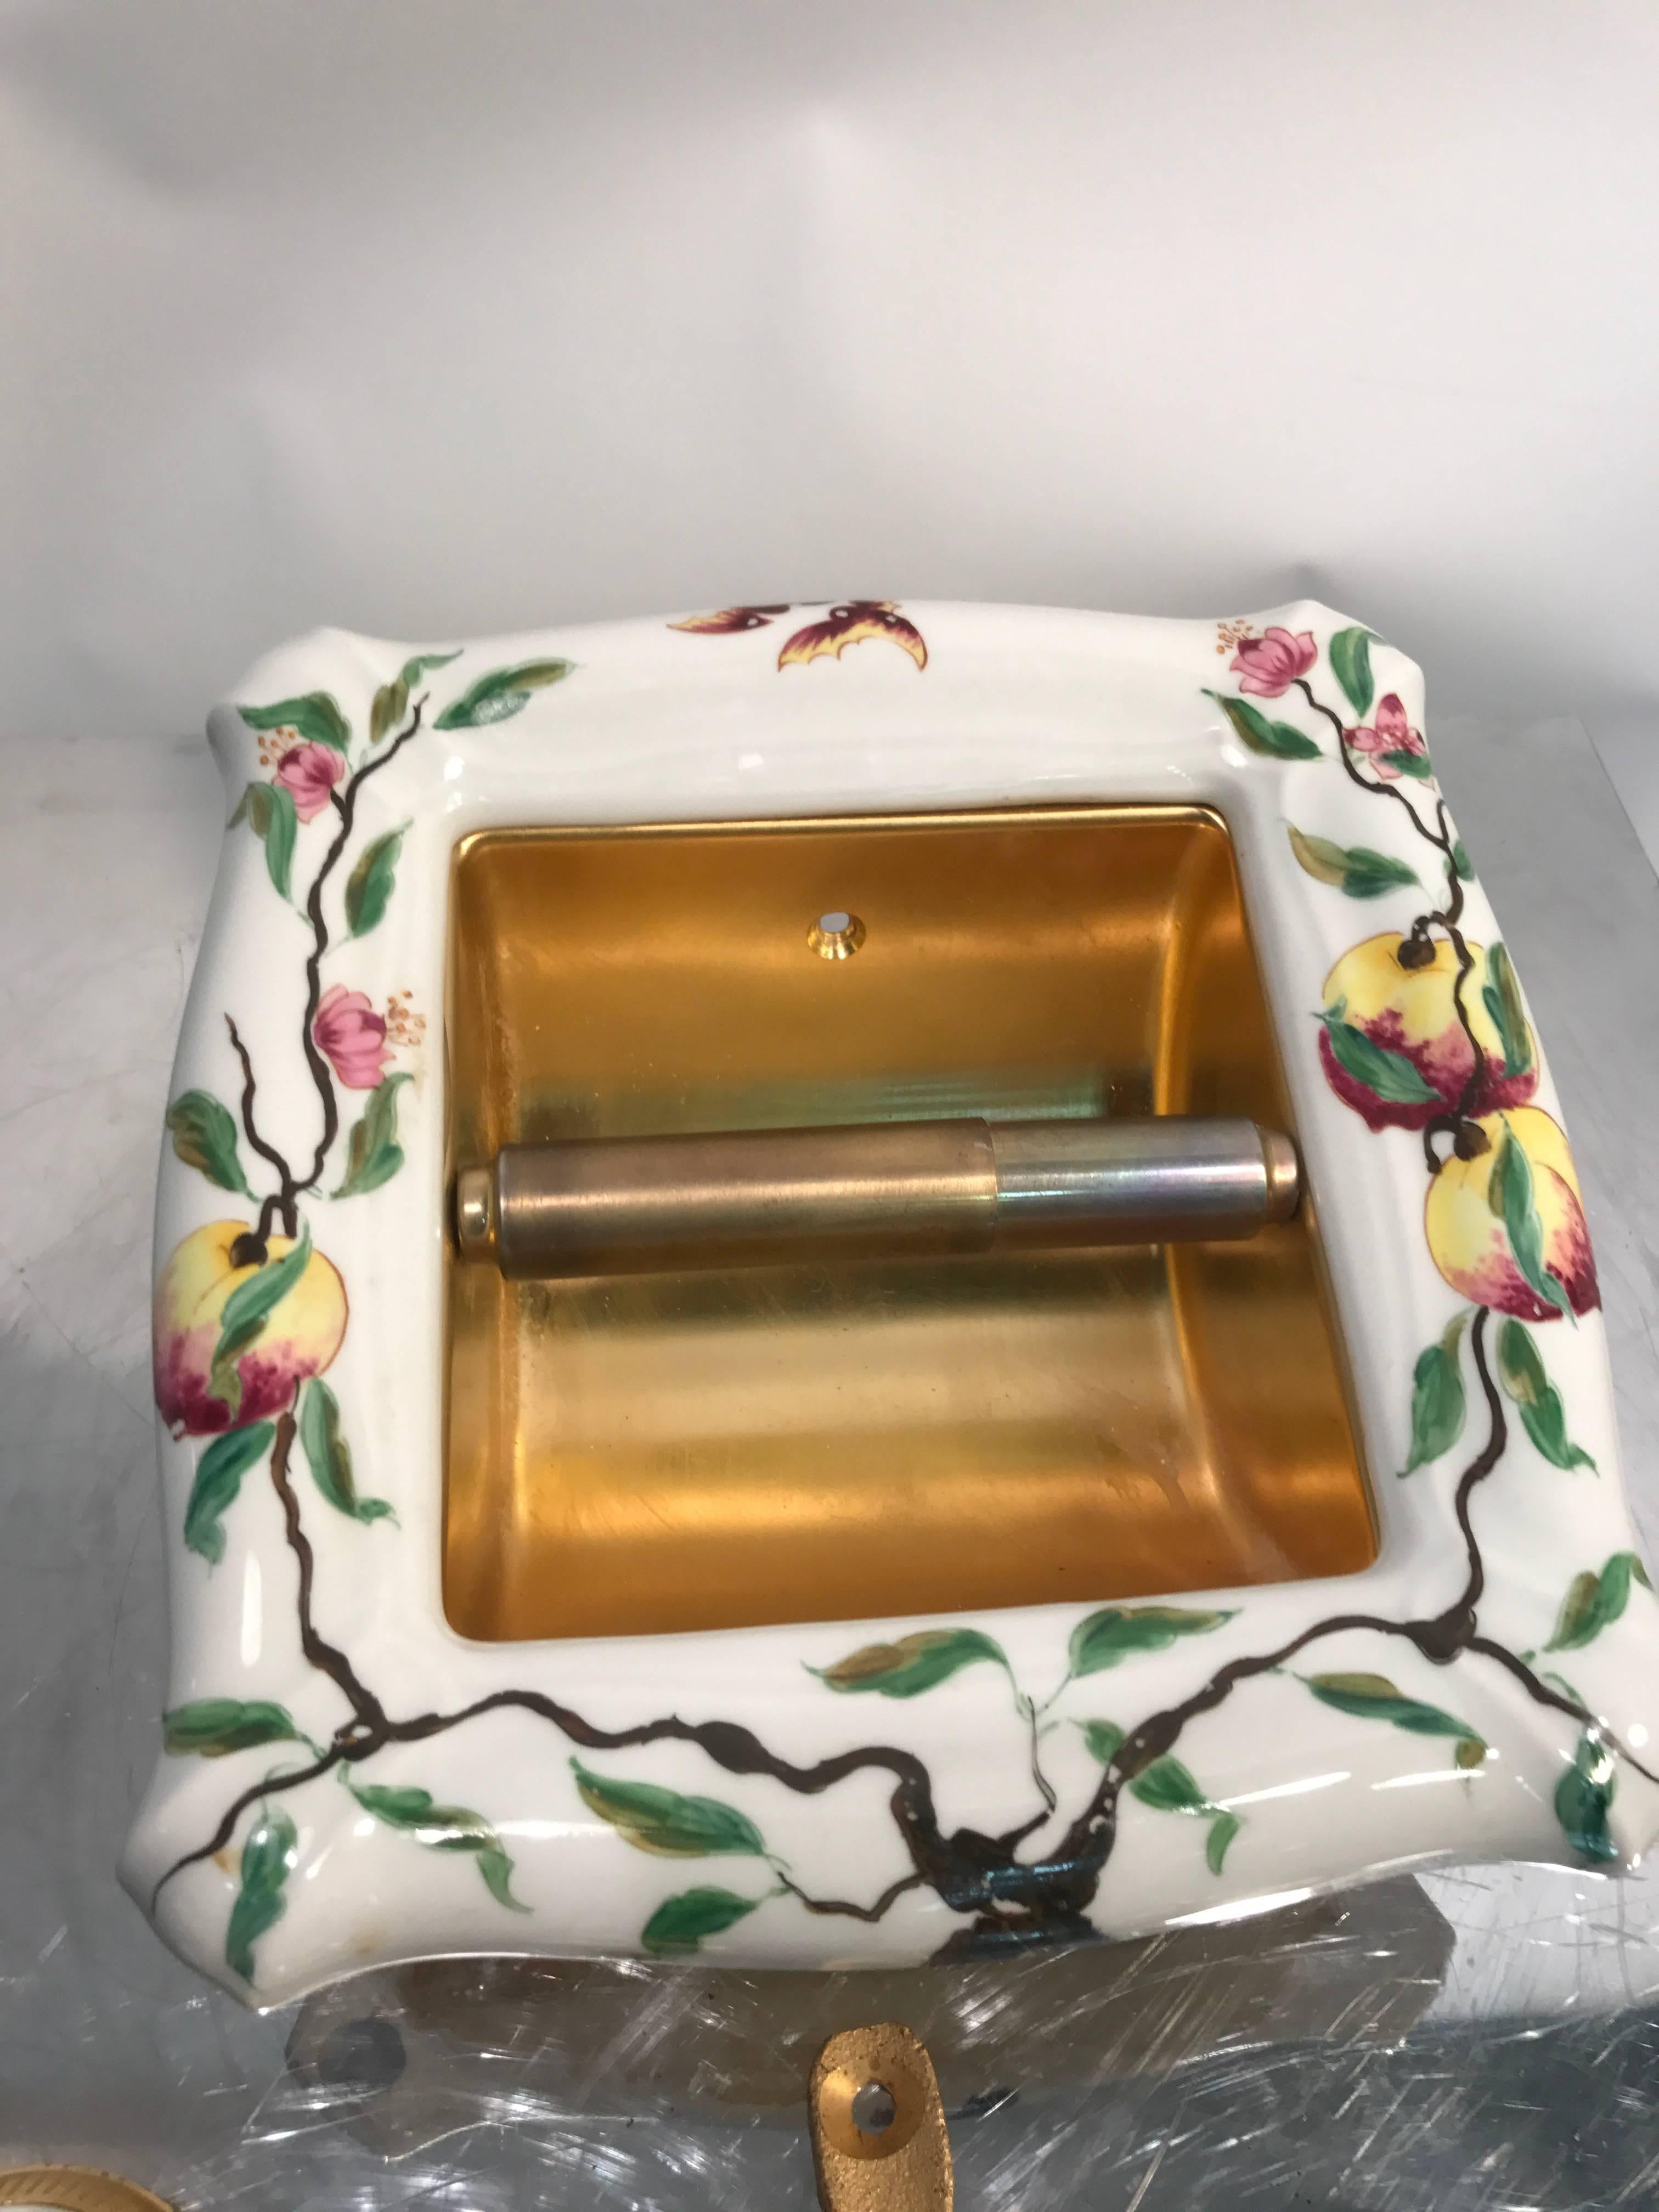 Exceptional Hand-Painted Porcelain & Gilt Bronze Sink with Bathroom Accessories 1